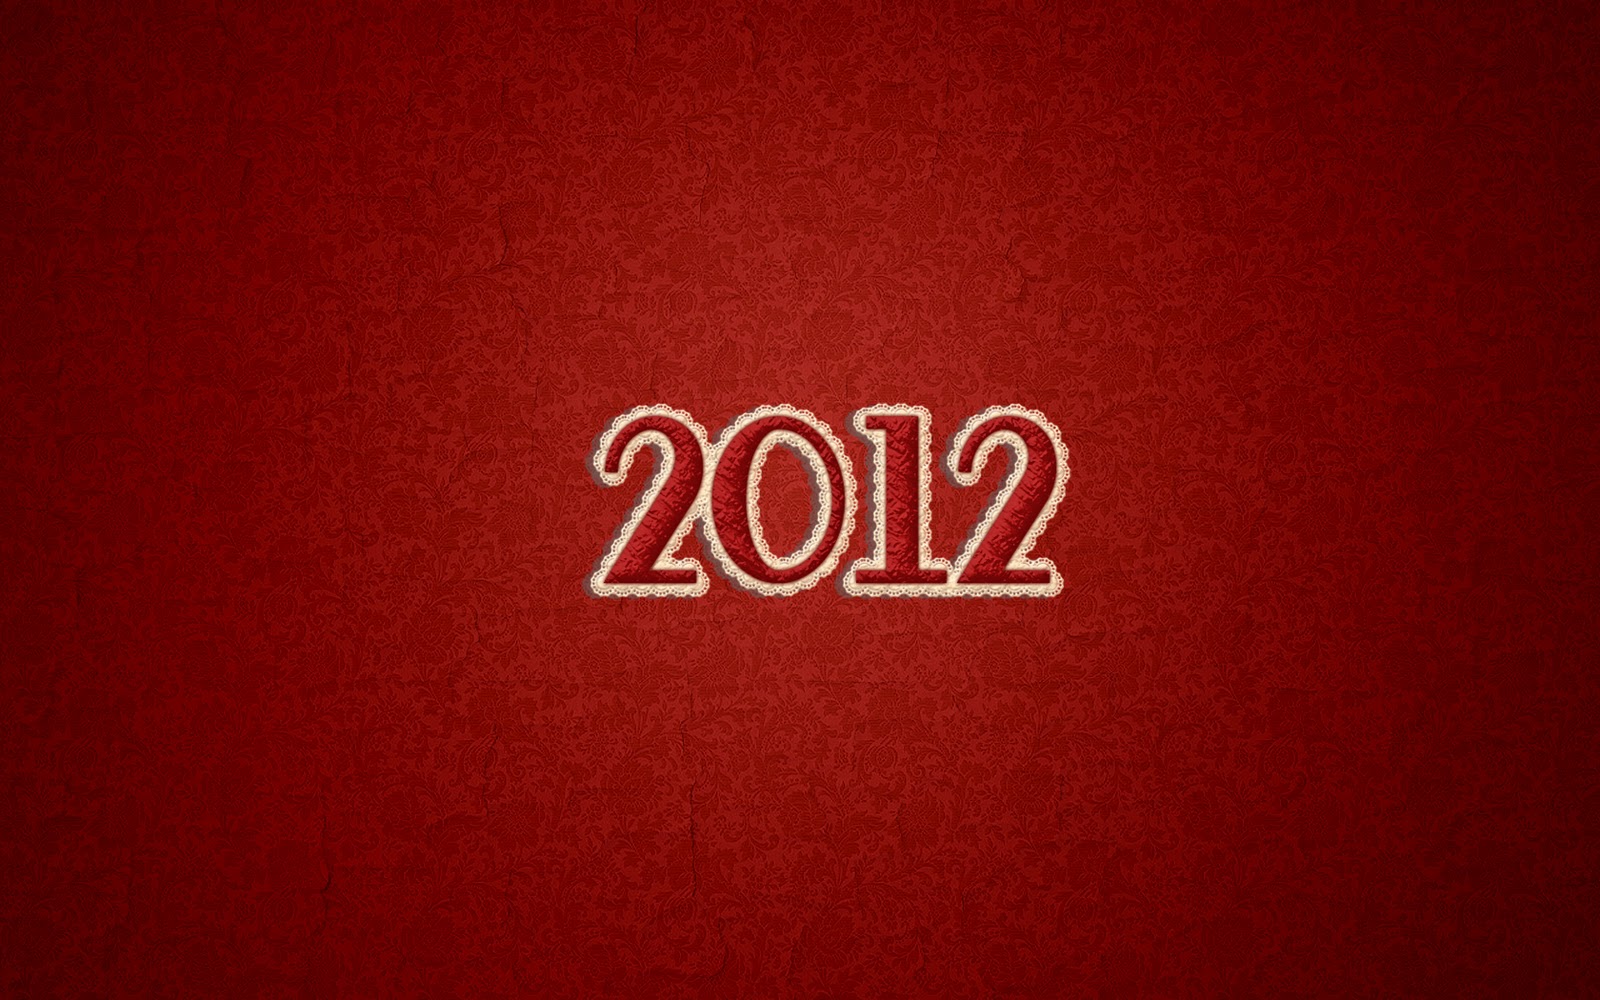 New Year 2012 High Quality Images and Wallpapers-10 1